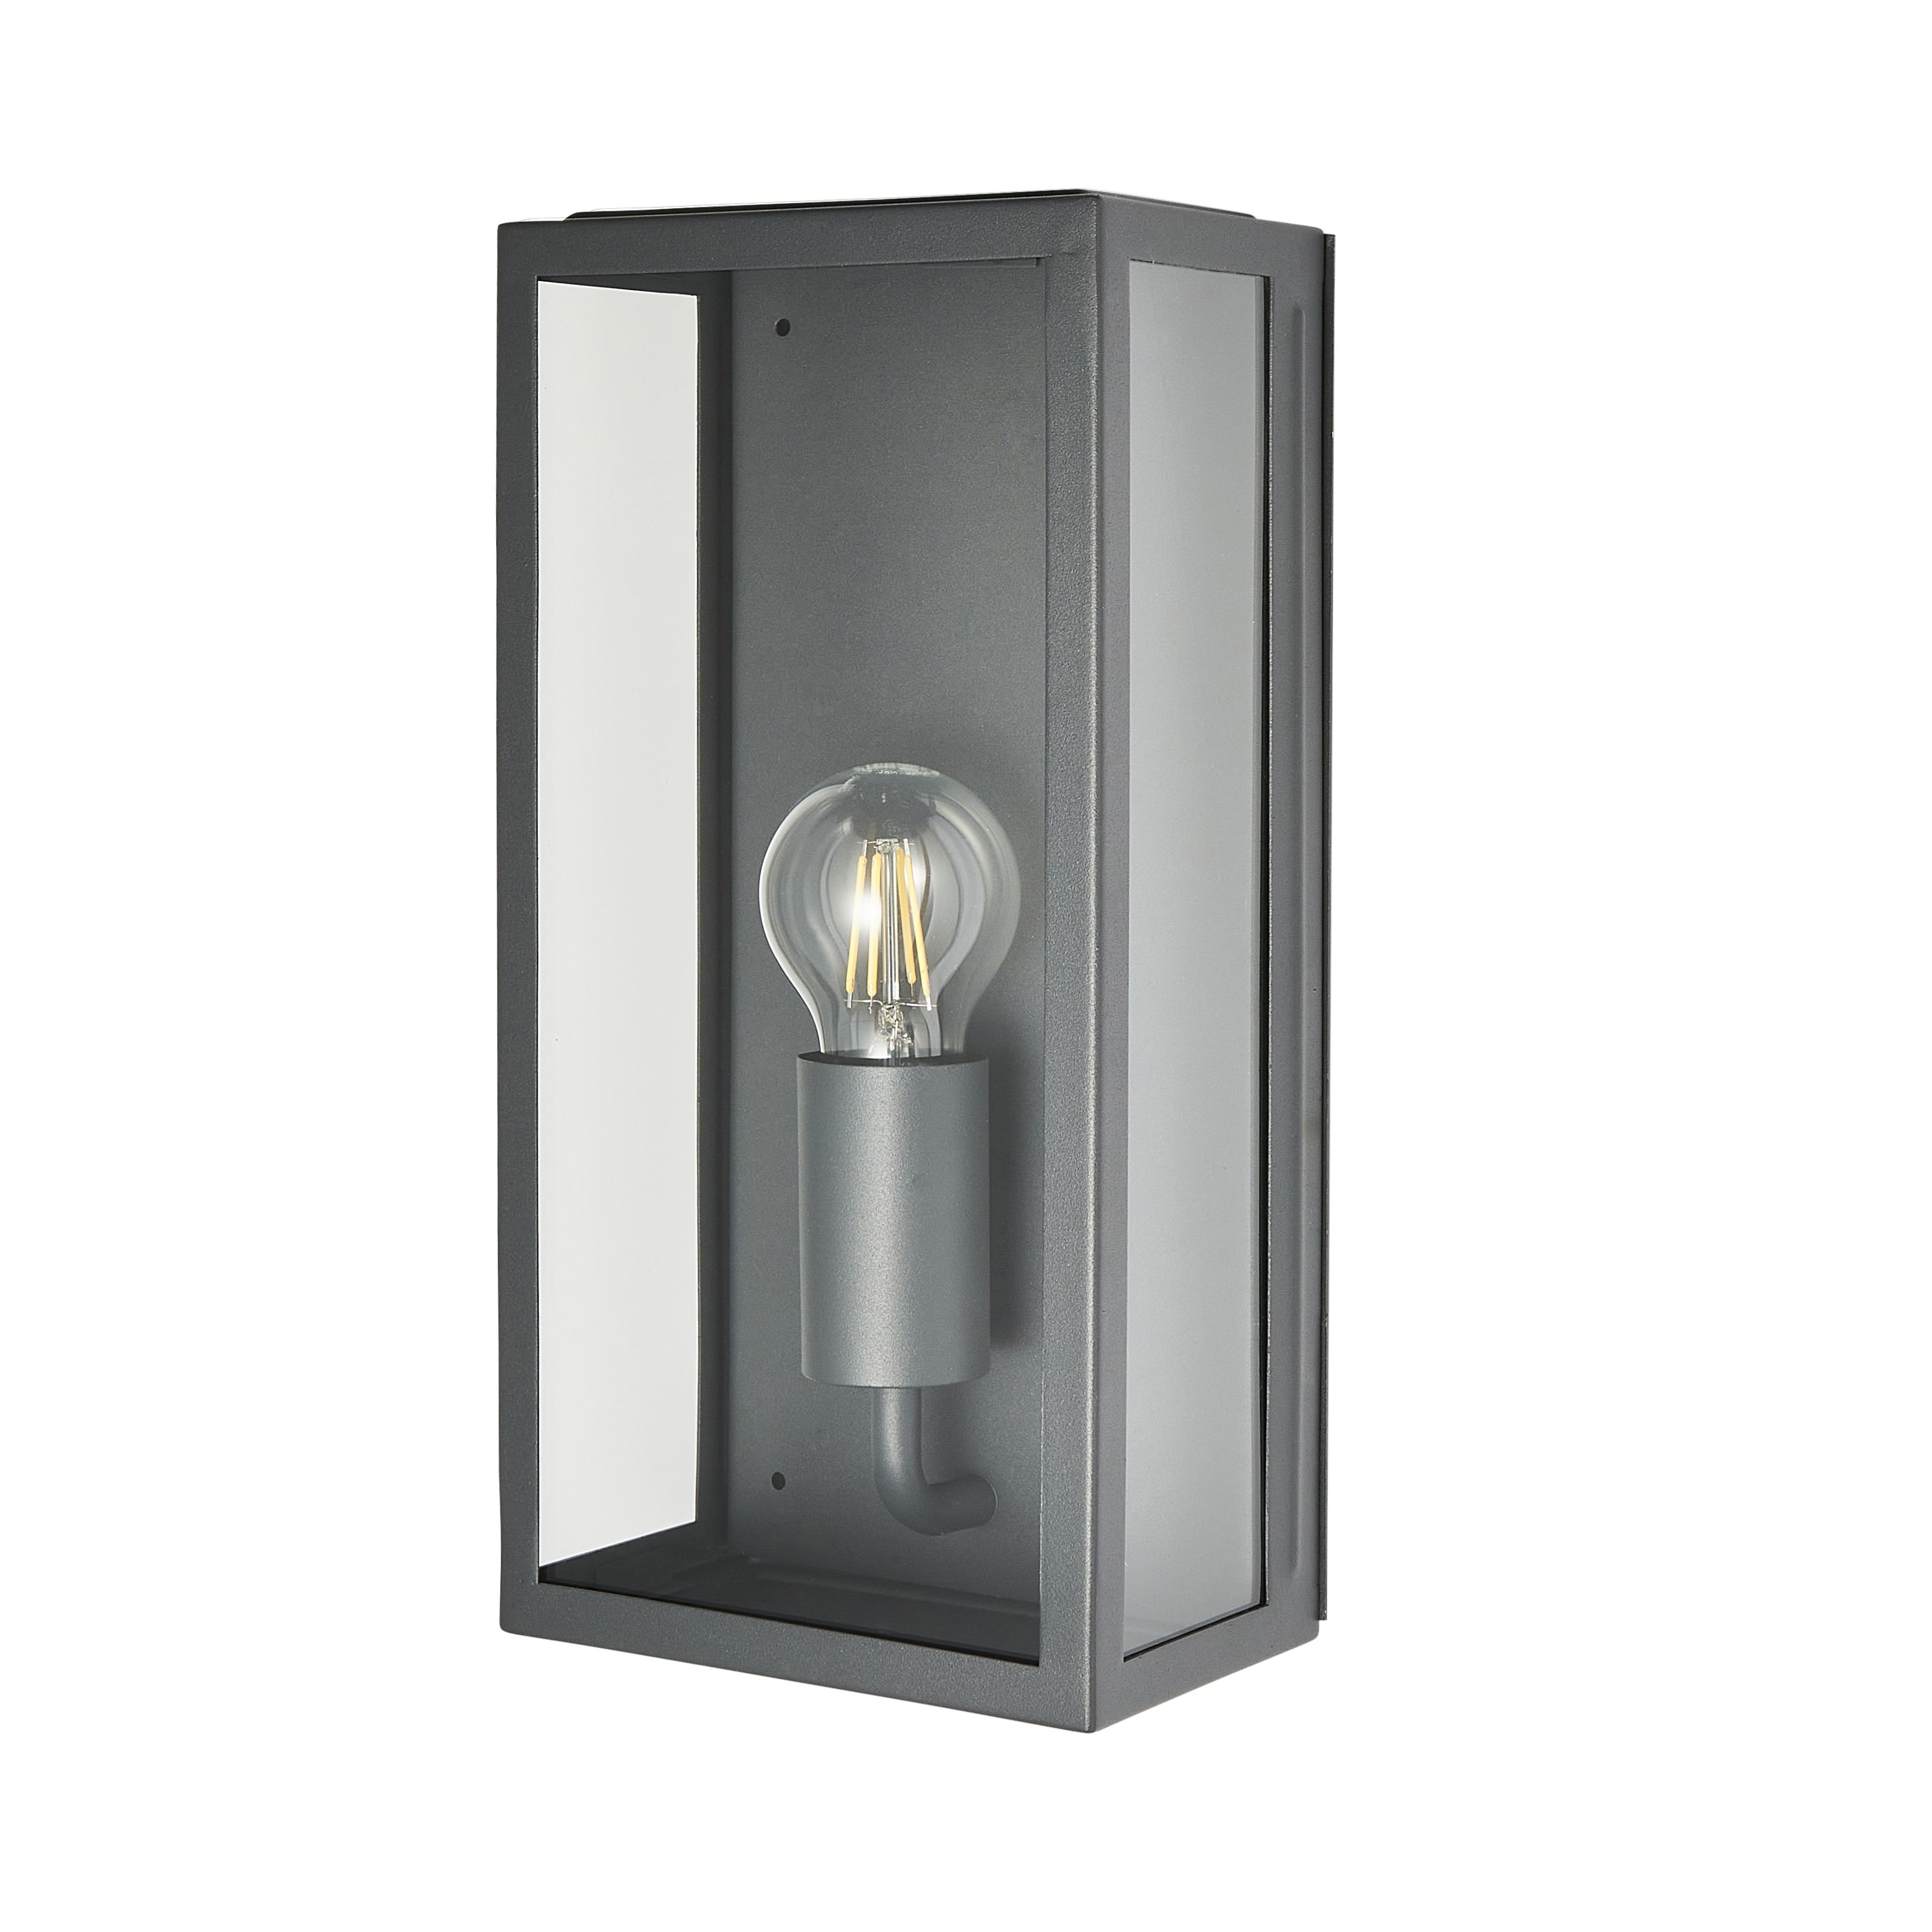 Zinc Thora Fixed Matt Anthracite Mains-powered LED Outdoor Box ON/OFF Wall light (Dia)16cm